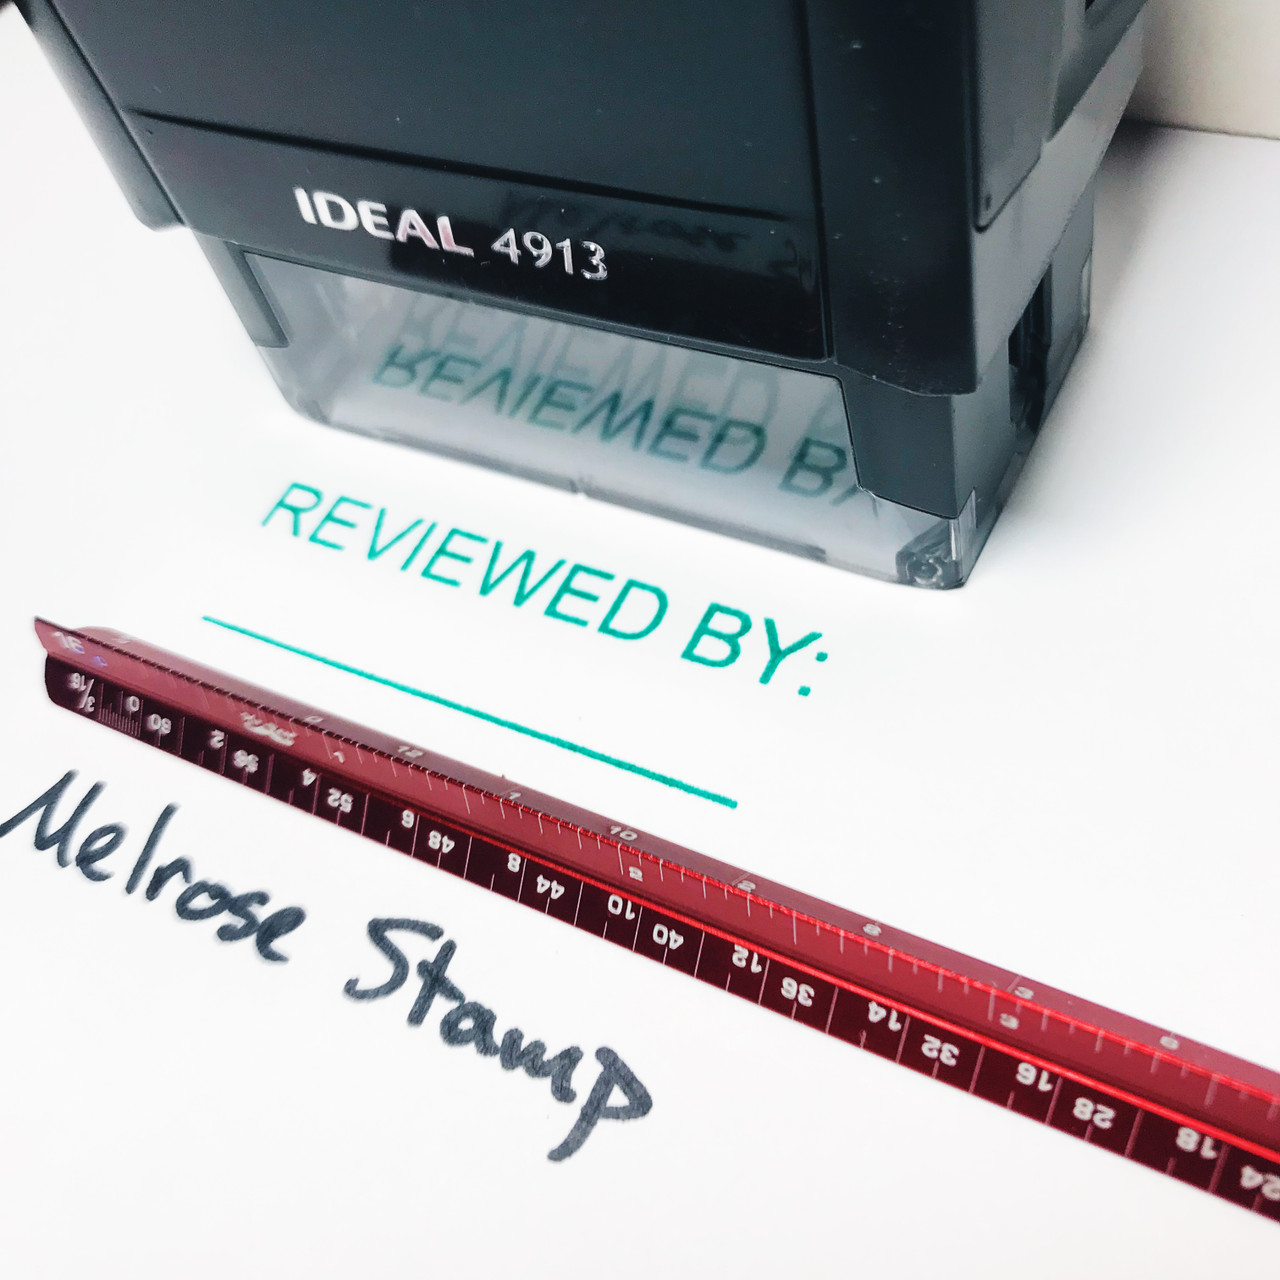 REVIEWED BY w/line Rubber Stamp for office use self-inking